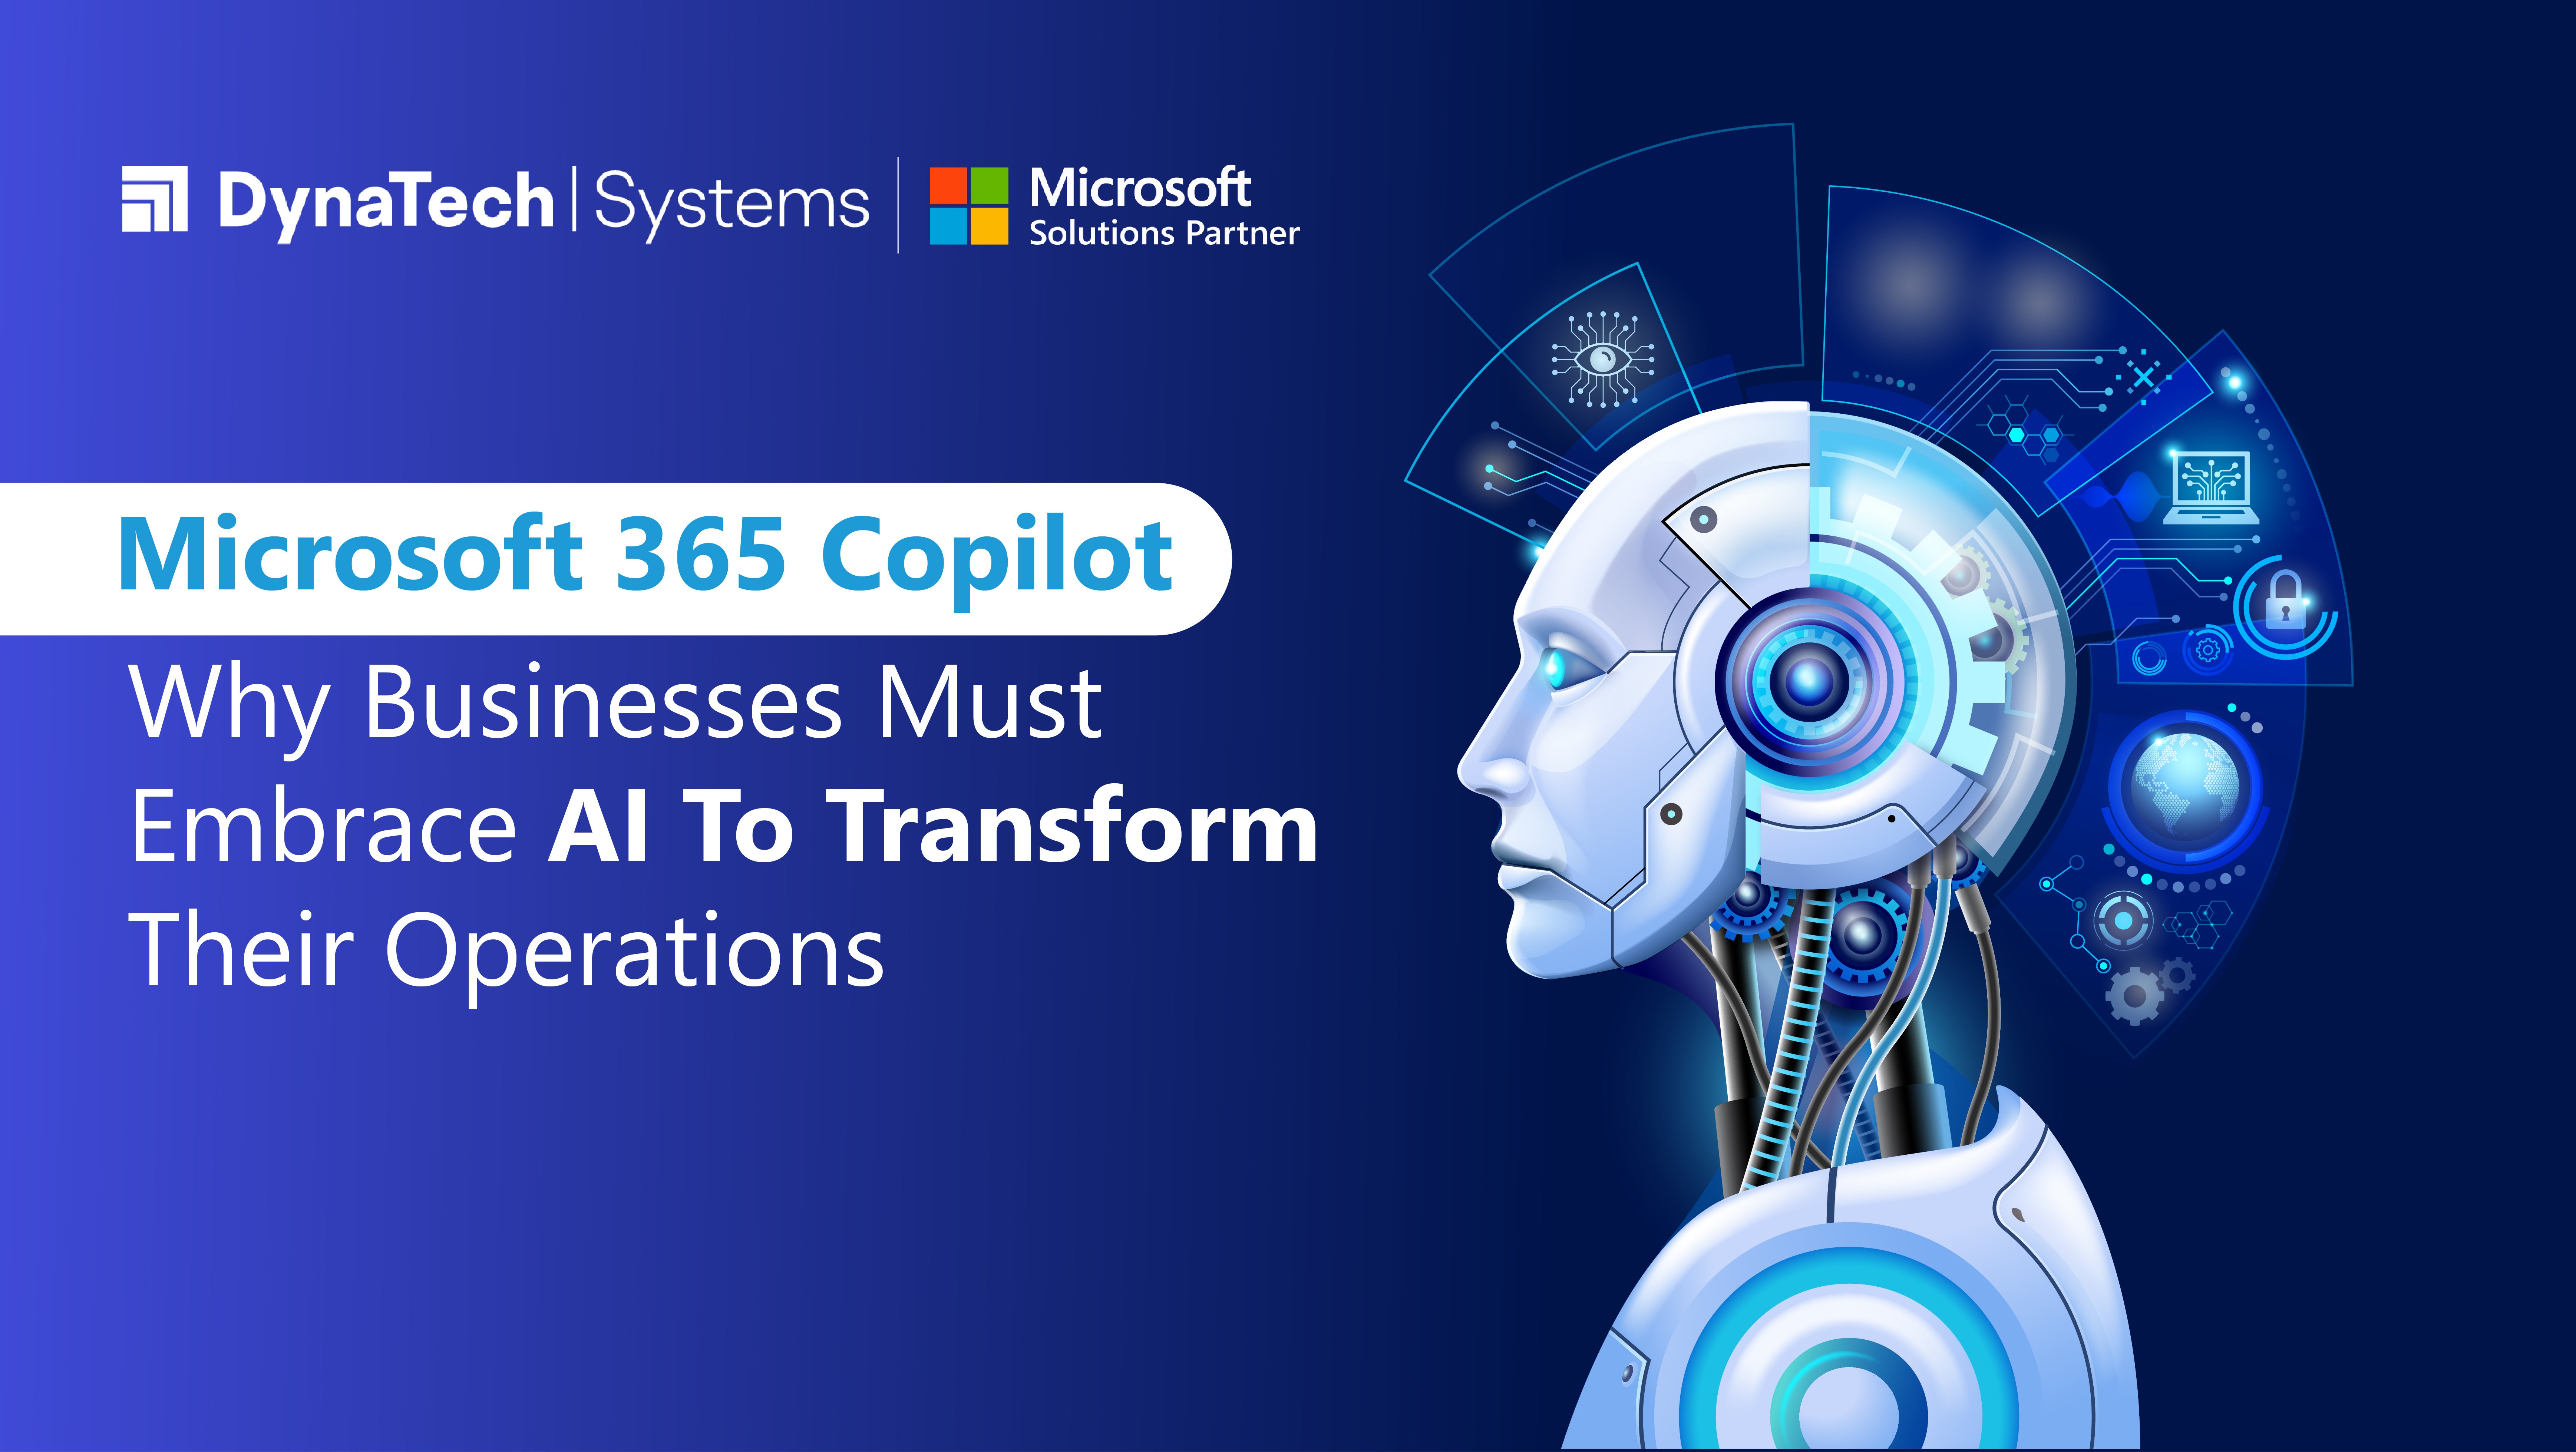 Microsoft 365 Copilot: Why Businesses Must Embrace AI To Transform Their Operations